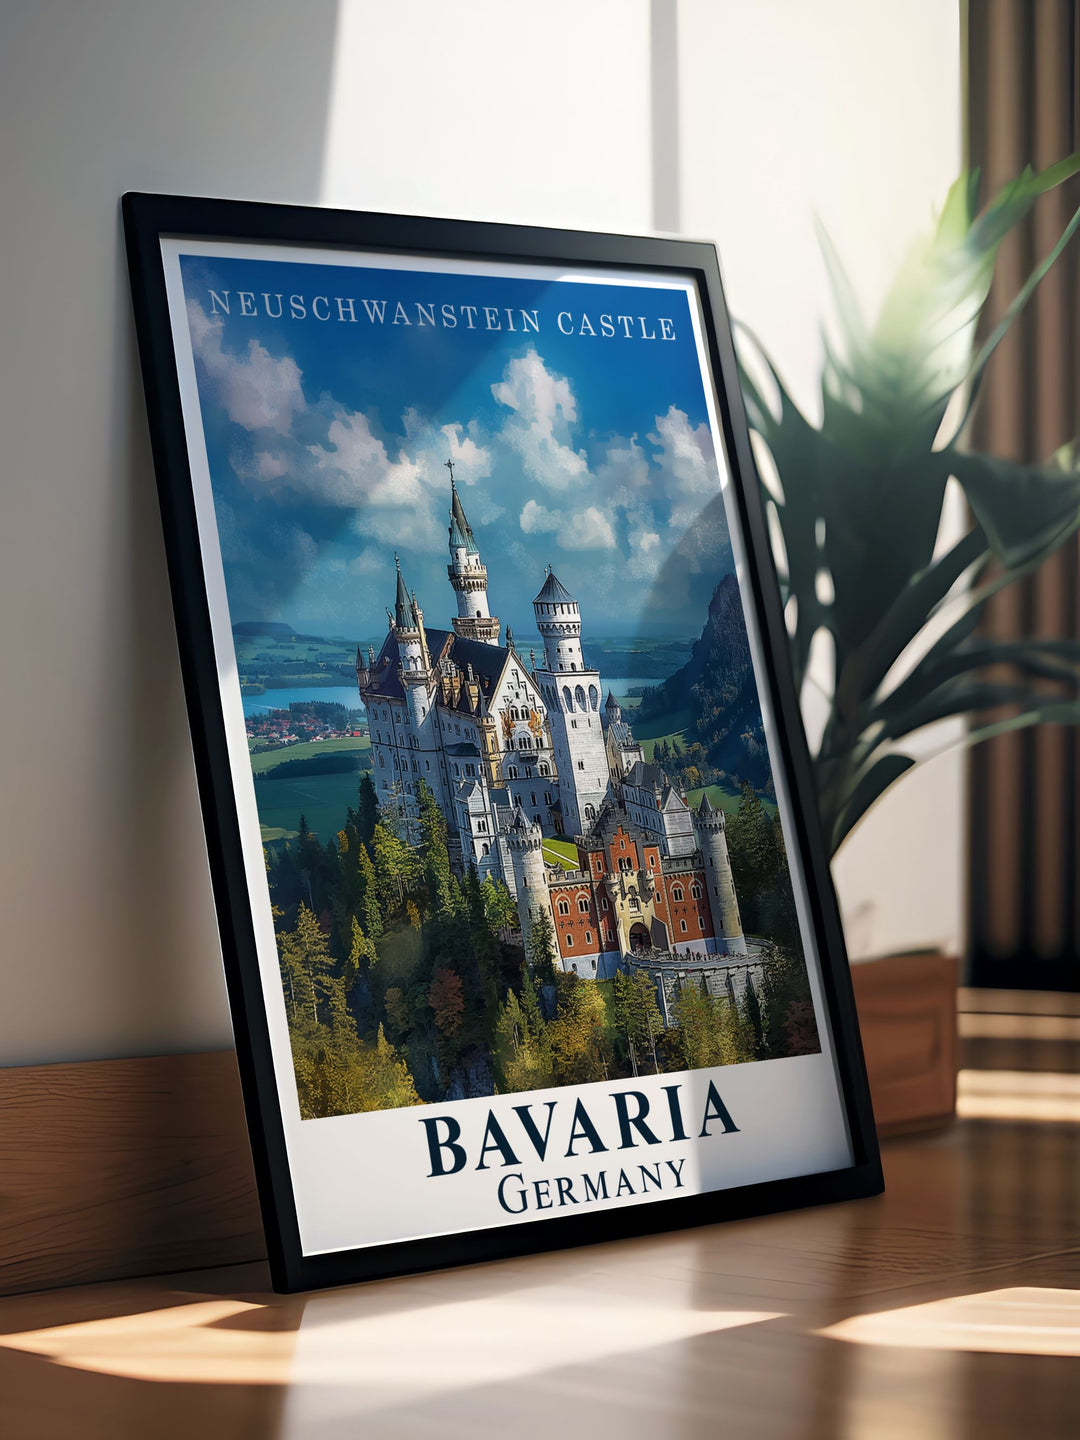 Stunning Neuschwanstein Castle artwork crafted with precision. This beautiful art print brings to life the intricate details and grandeur of Neuschwanstein Castle enhancing any rooms decor.